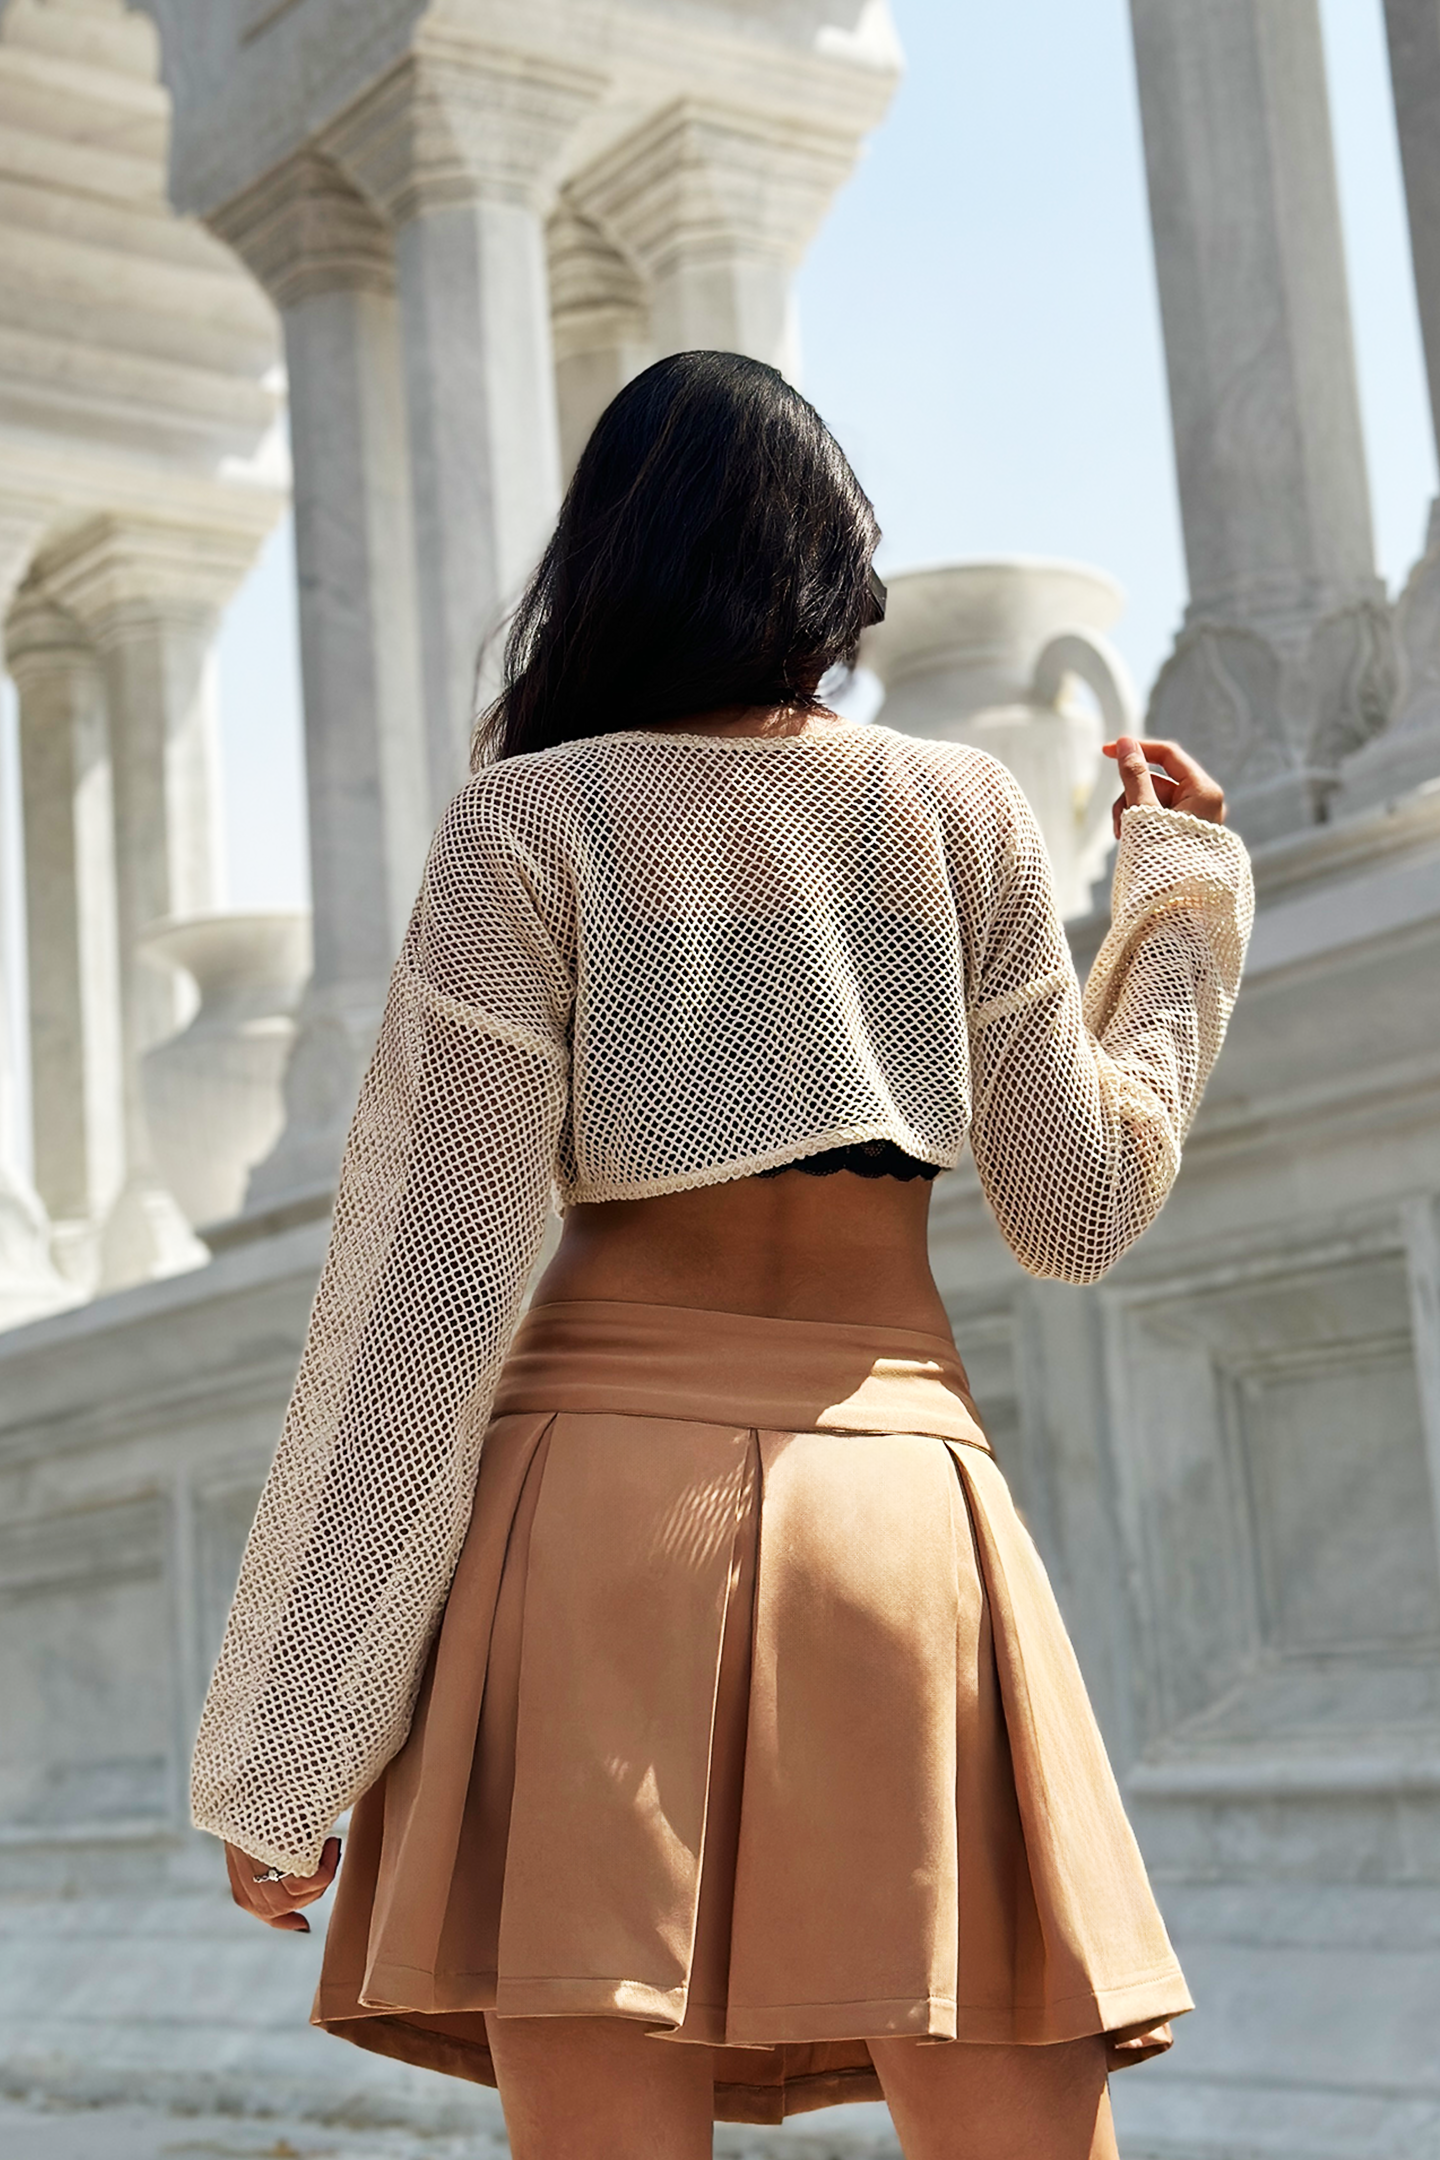 A fashionable Ronazen caramel flare A-line skirt, featuring a rich, warm caramel hue. The skirt has a soft, flowing texture and an elegant flare that enhances its A-line shape, making it perfect for a stylish and sophisticated look